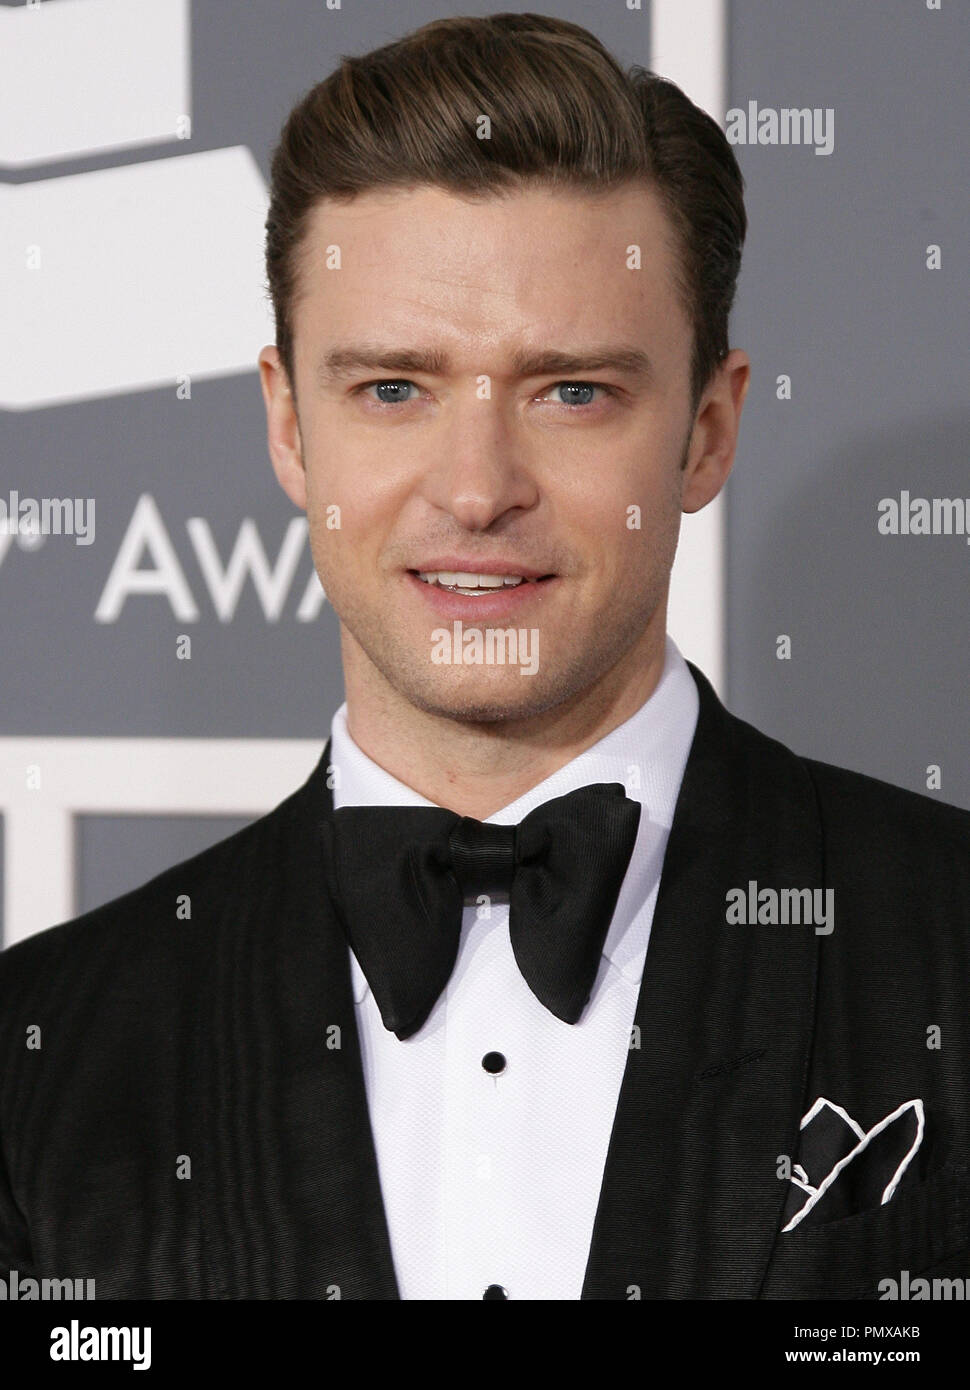 Justin Timberlake at the 55th Annual Grammy Awards held at the Staples Center in Los Angeles, CA.The event took place on Sunday, February 10, 2013. Photo by PRPP / PictureLux  File Reference # 31836 111PRPP  For Editorial Use Only -  All Rights Reserved Stock Photo